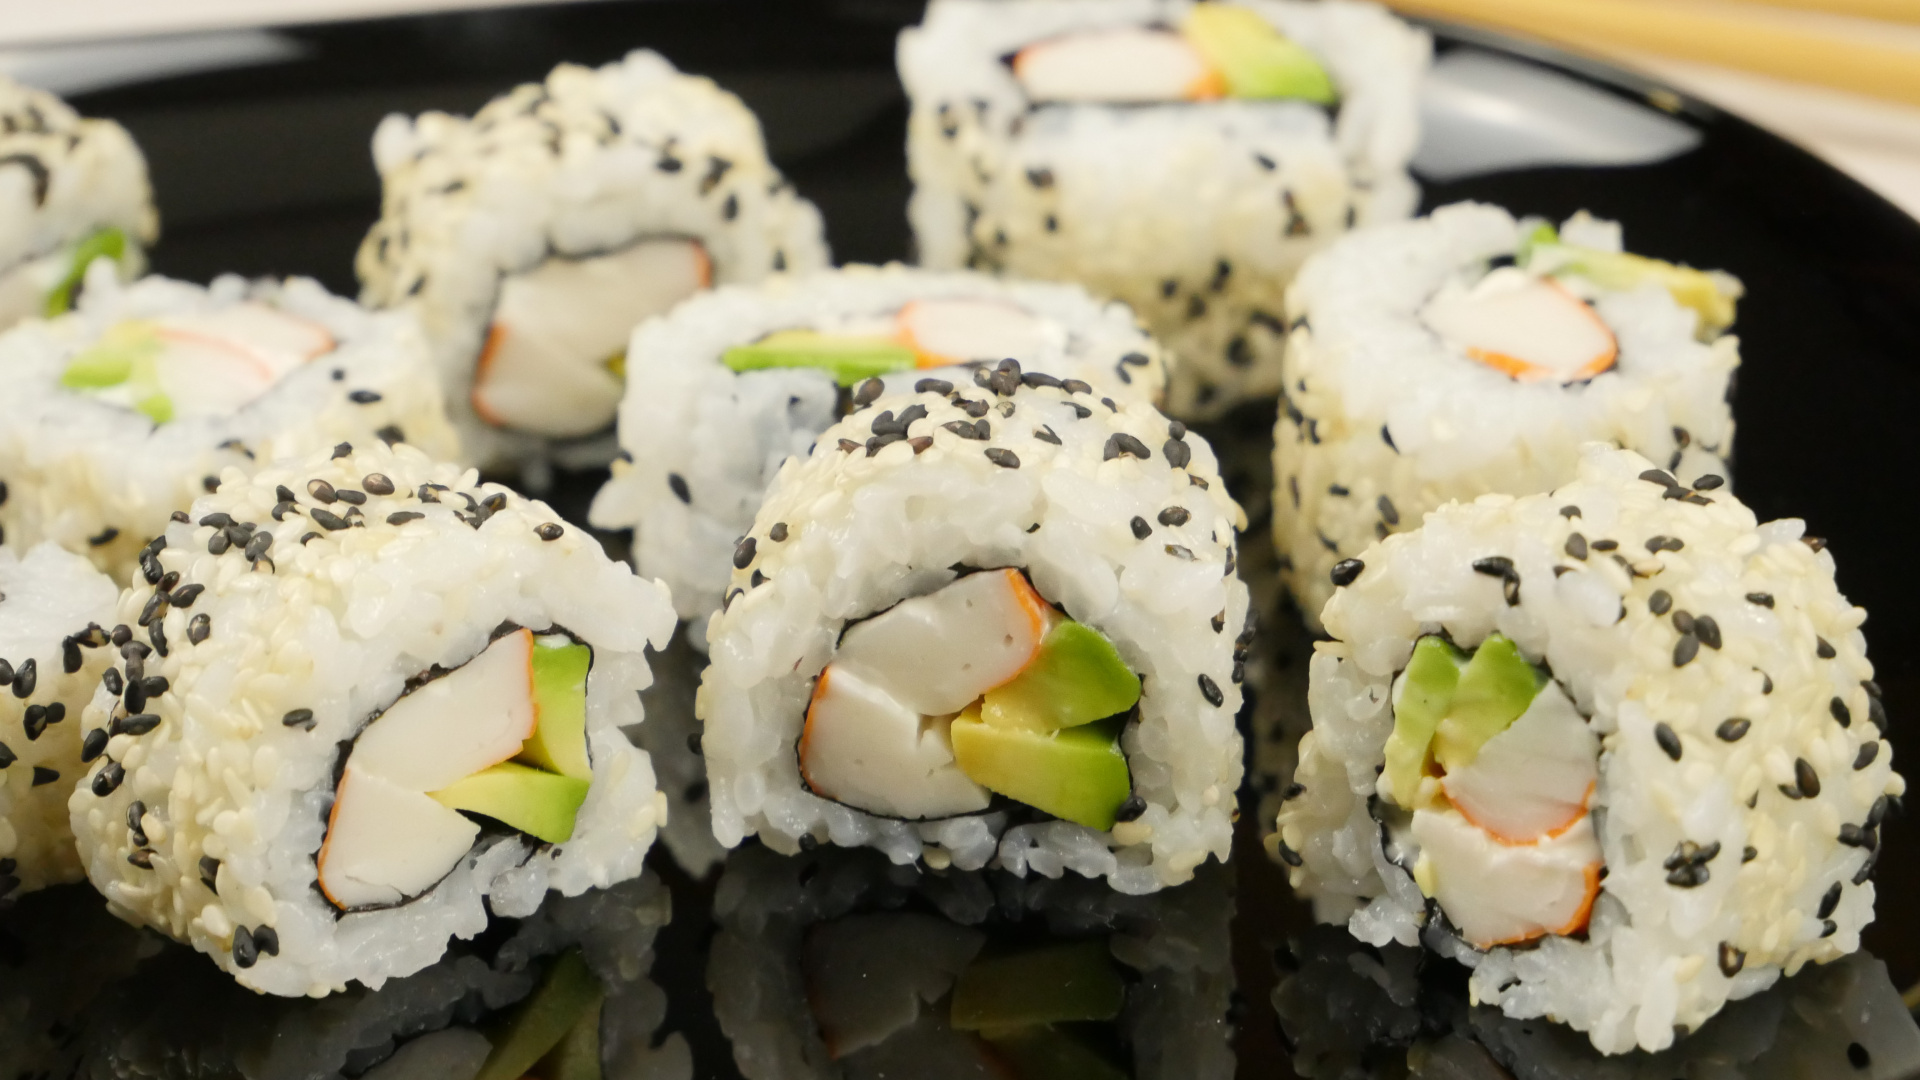 Sushi: Rice, Filled with avocado, crab, and cucumber. 1920x1080 Full HD Wallpaper.